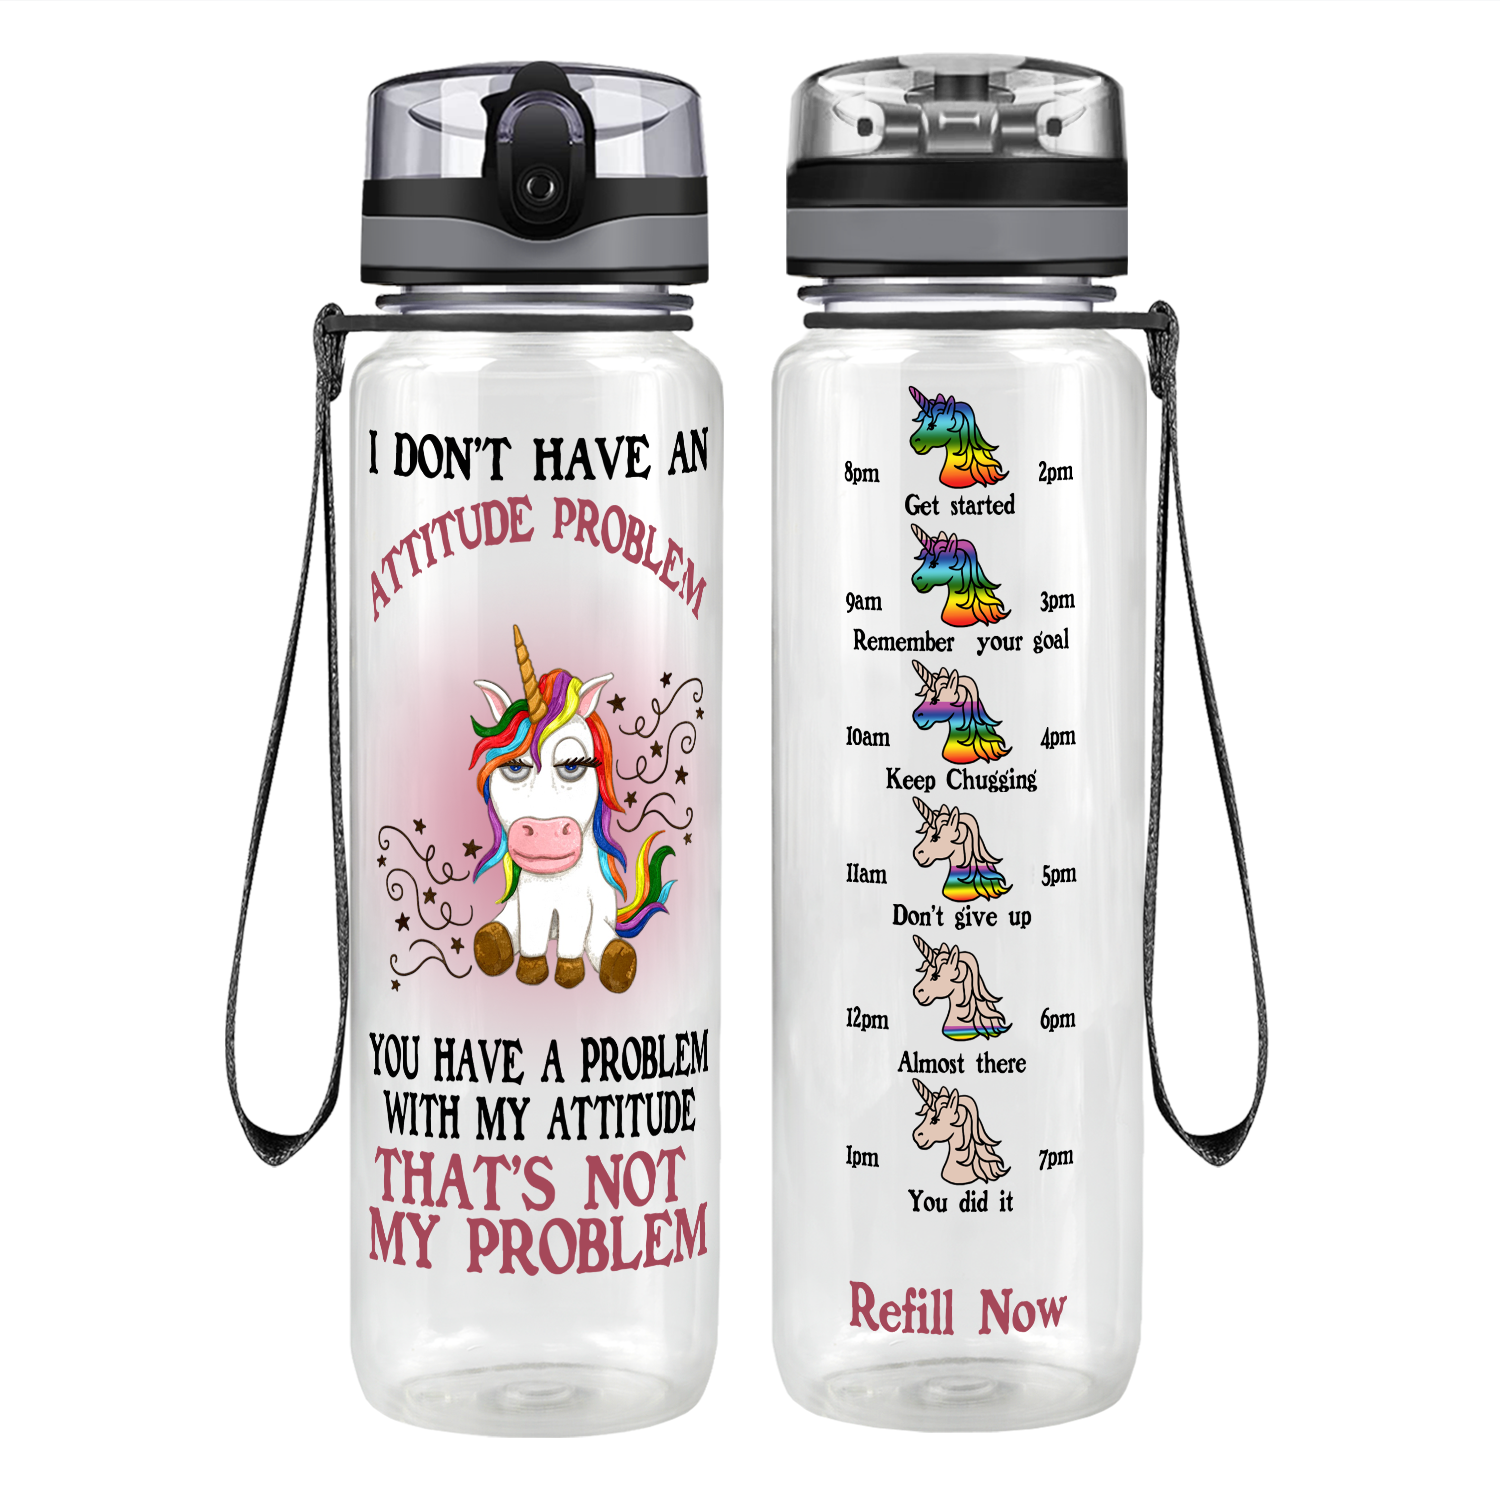 I Don't Have An Attitude Problem Motivational Tracking Water Bottle